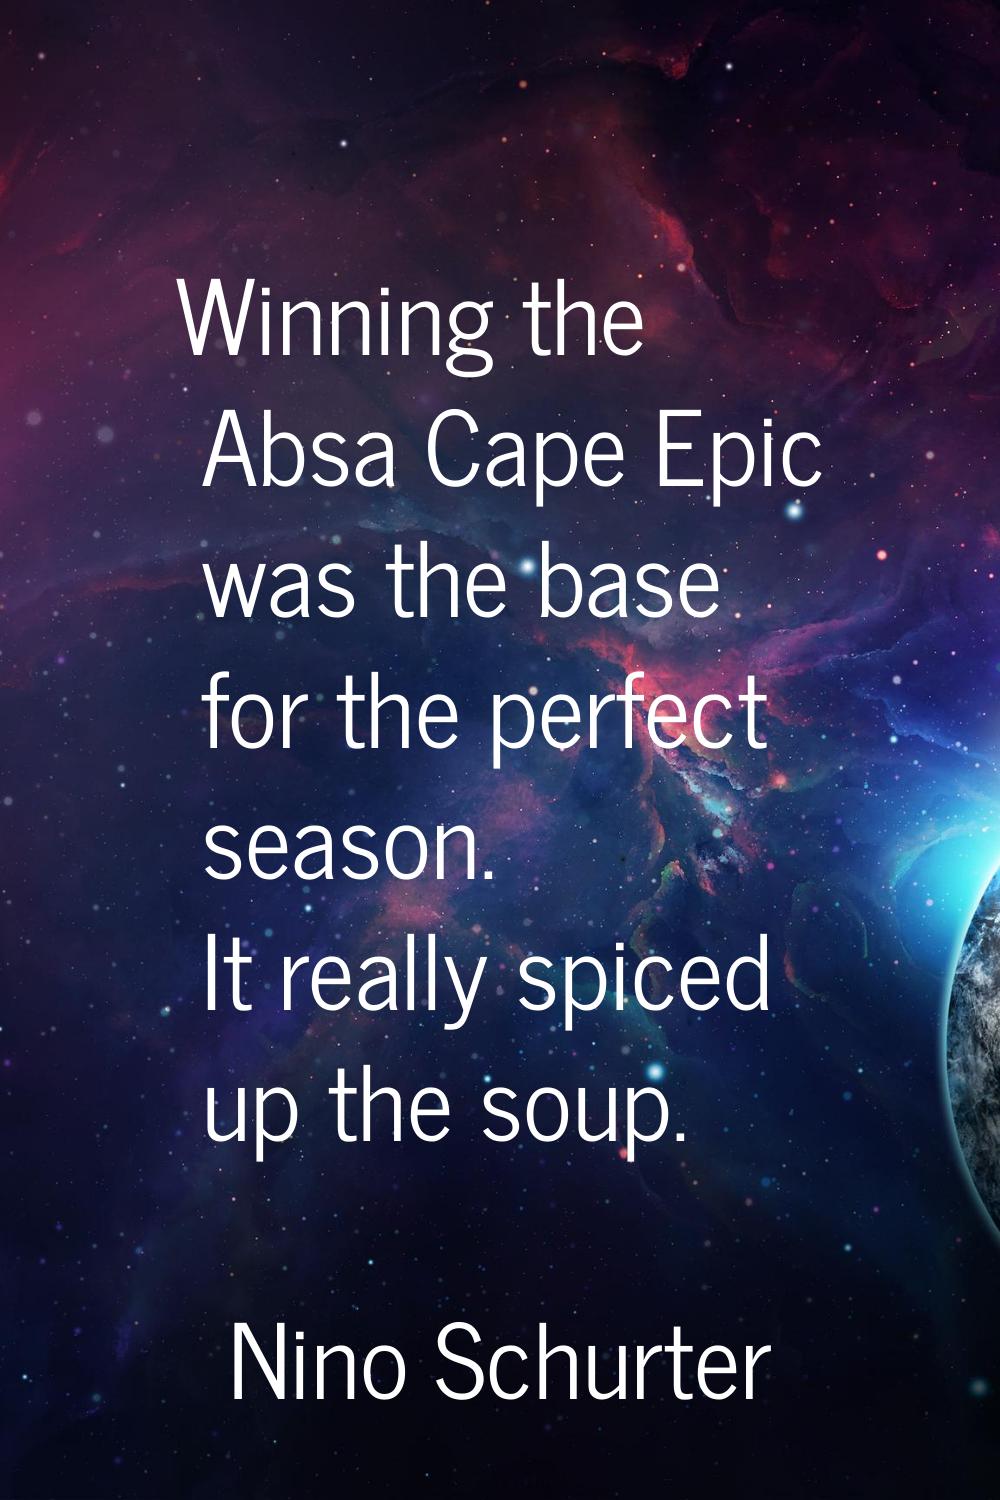 Winning the Absa Cape Epic was the base for the perfect season. It really spiced up the soup.